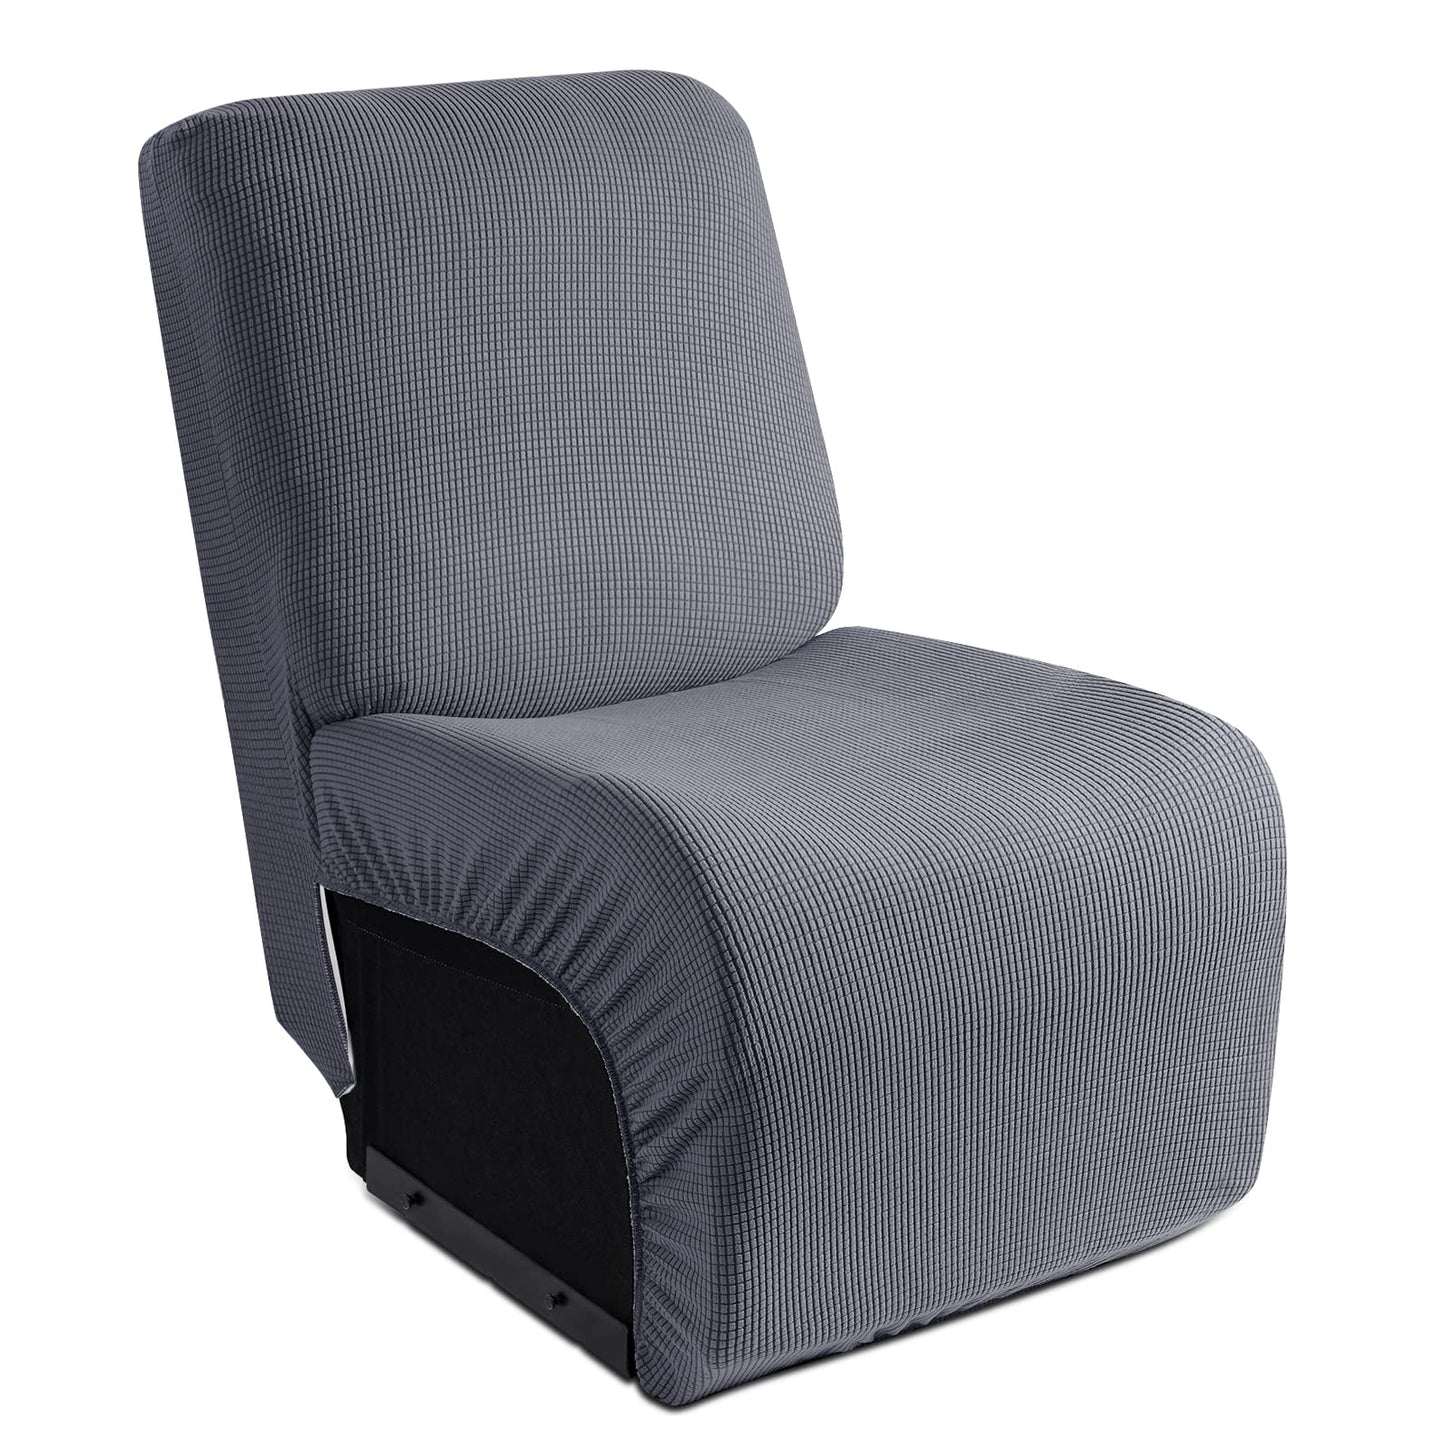 Additional Seat Cover for Reclining Couch Covers